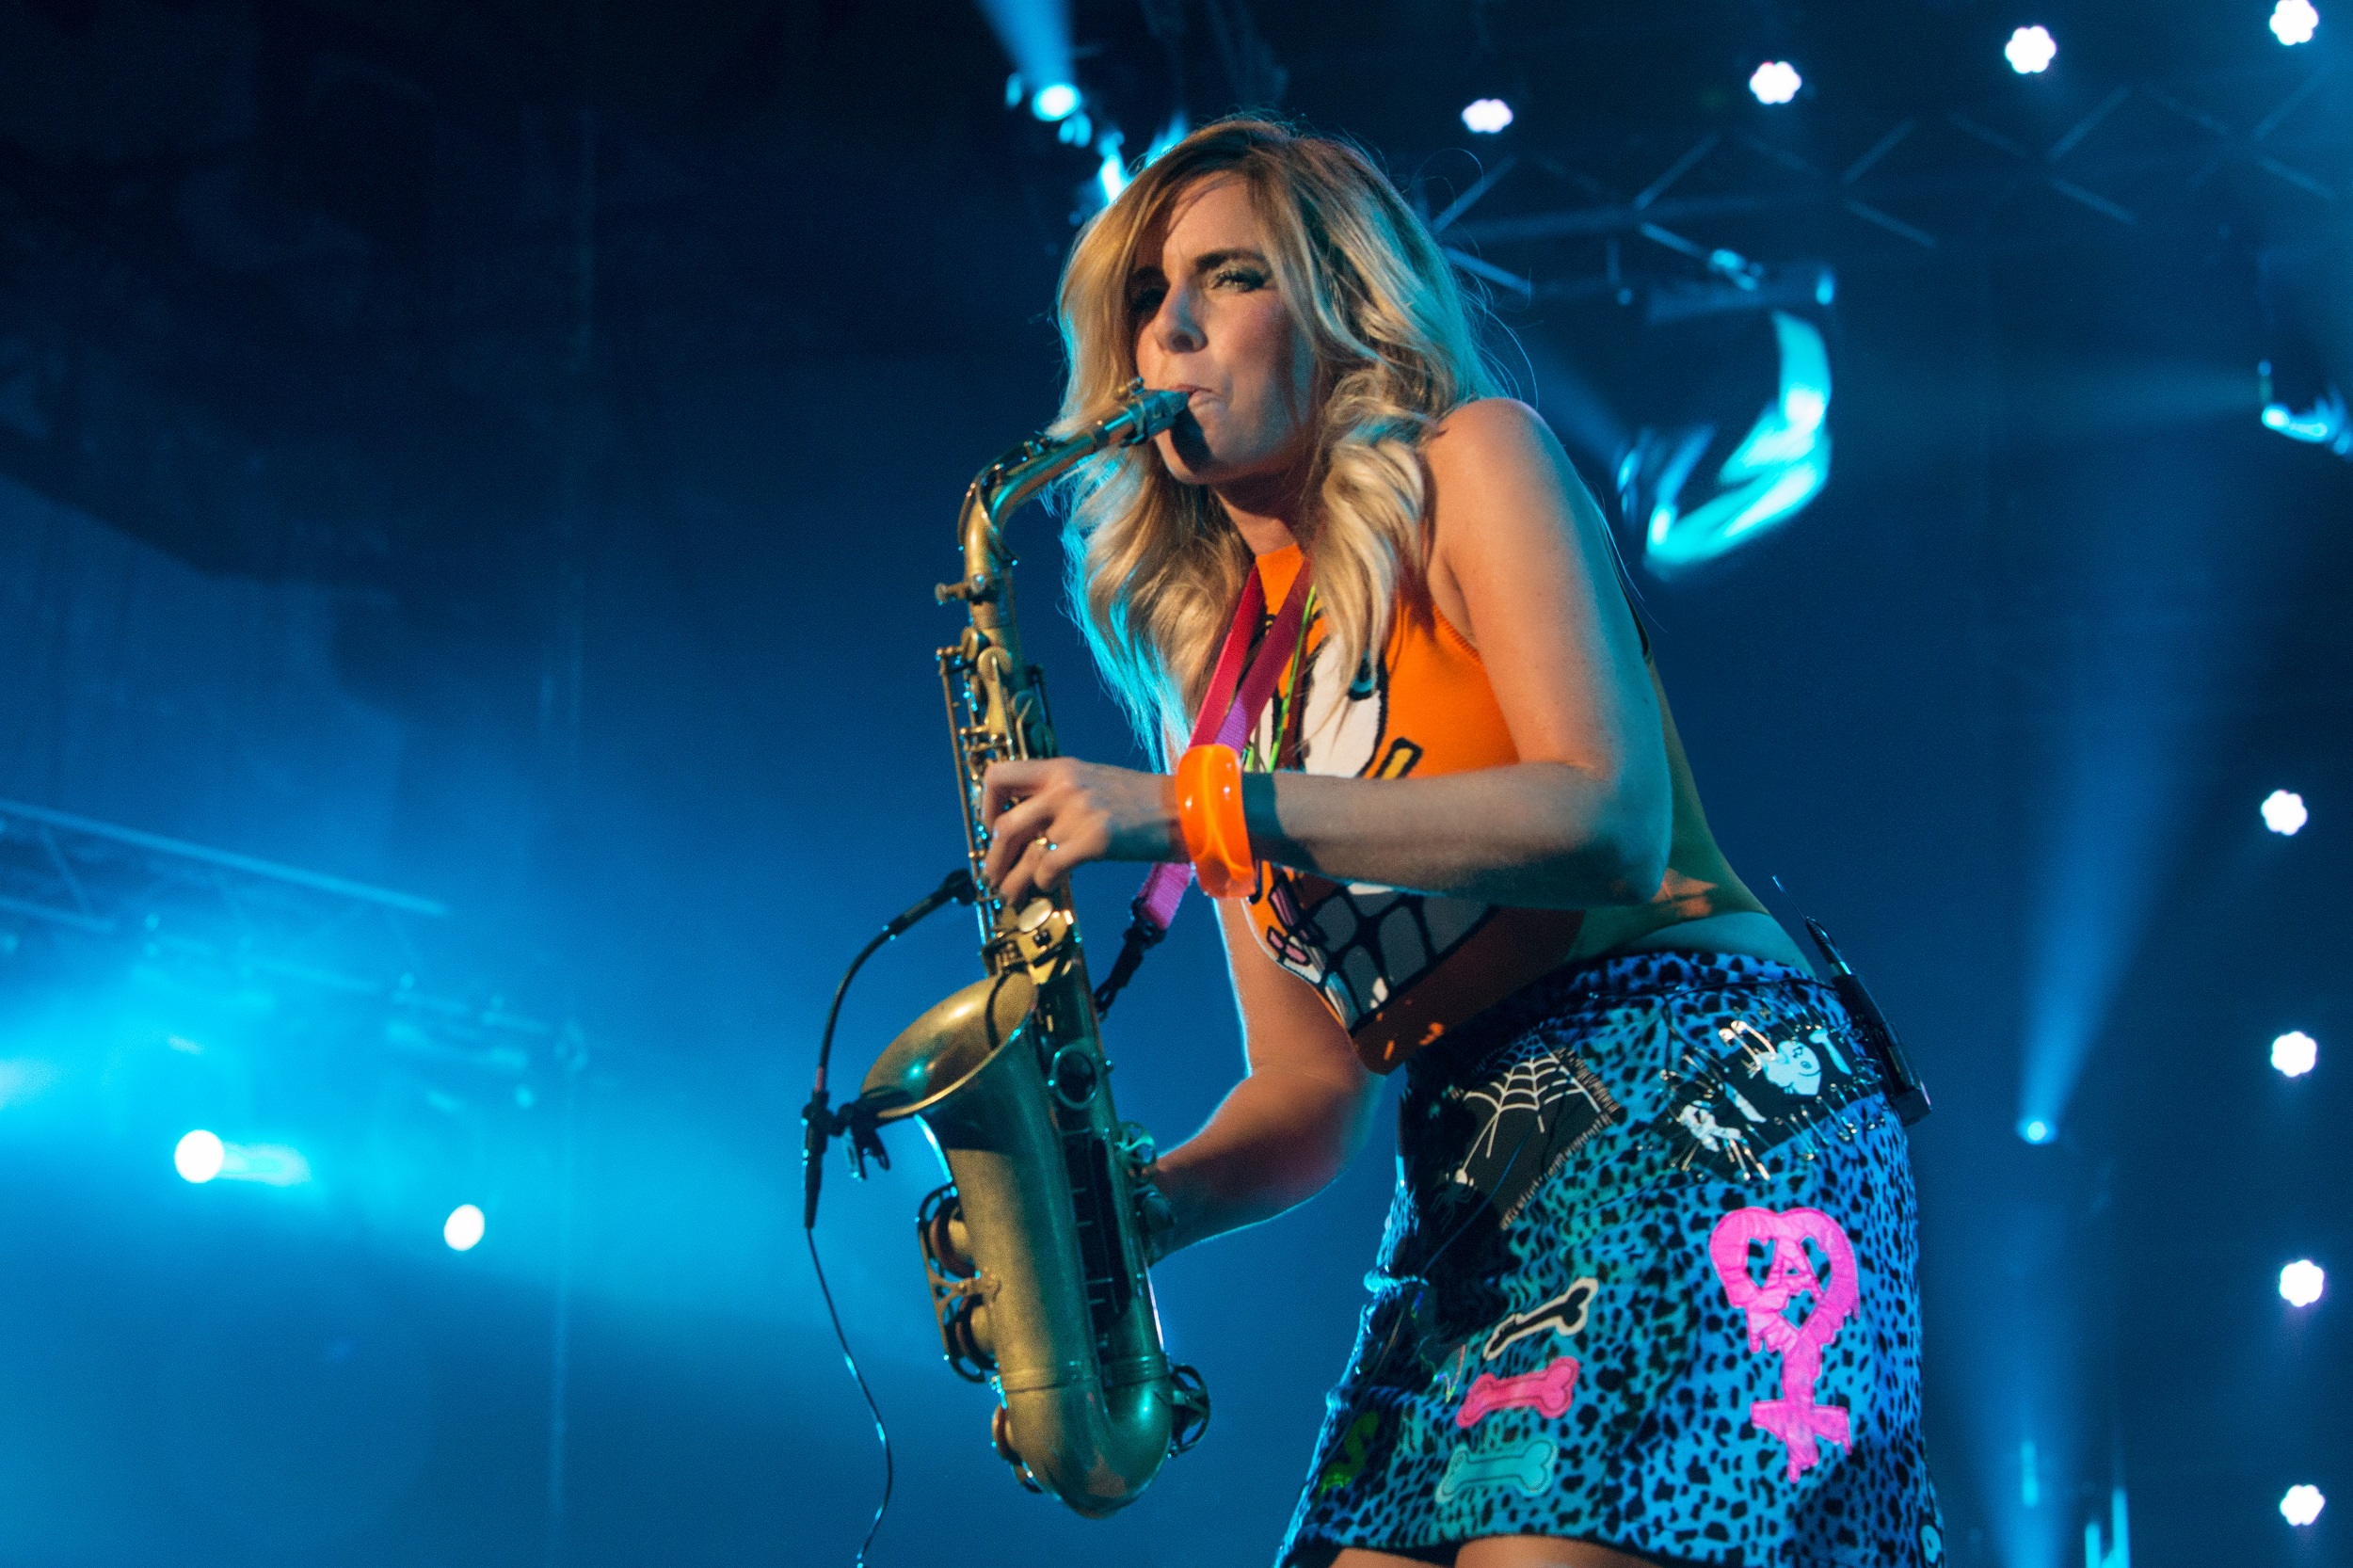 Saxophonist Candy Dulfer plays on a blue-lit stage.